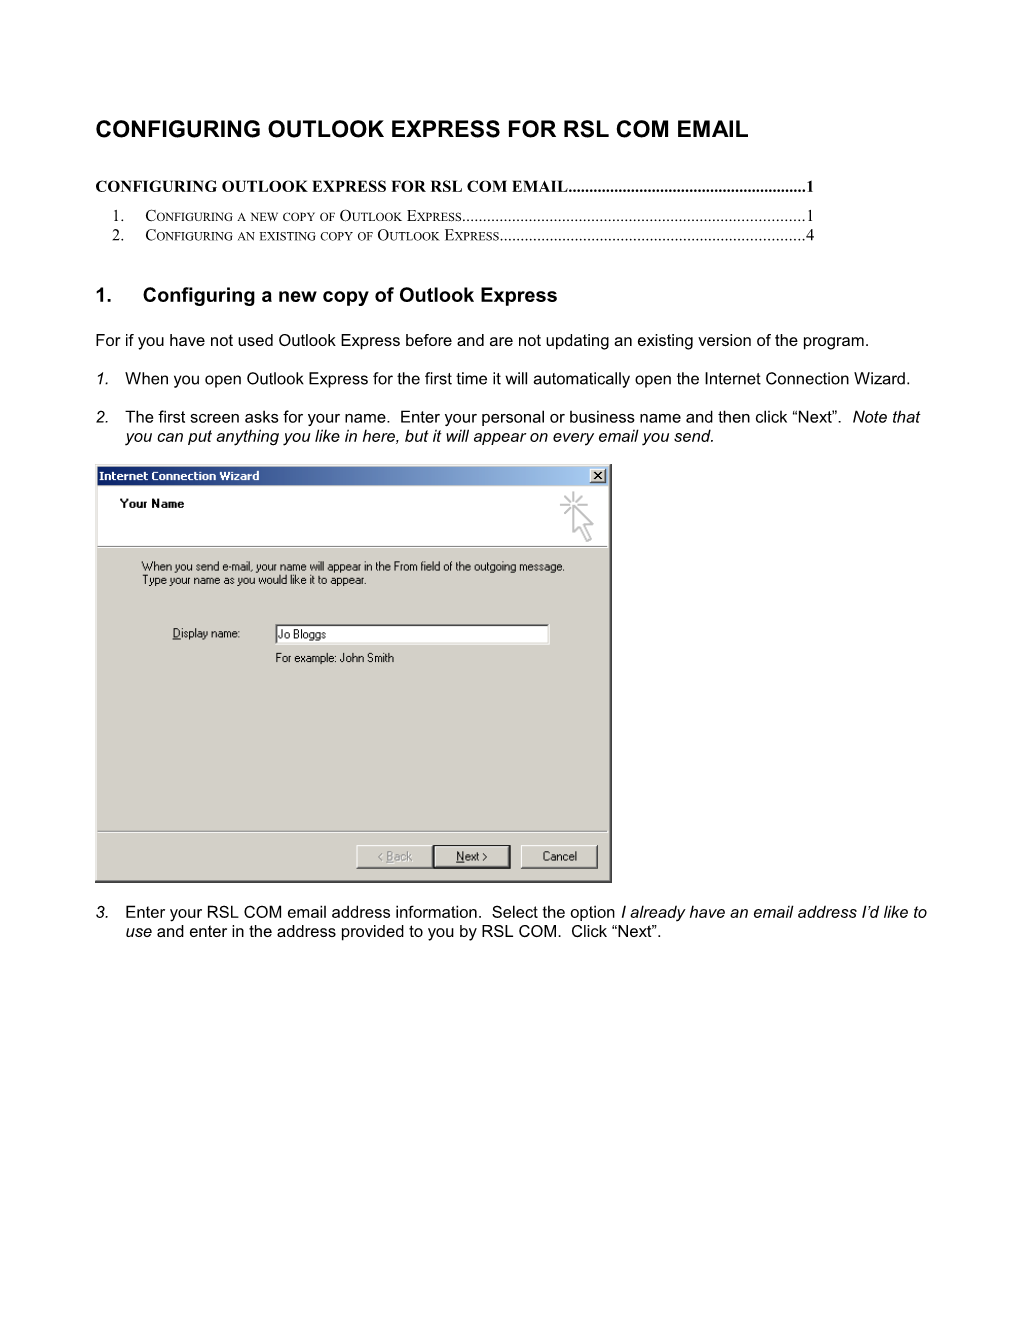 Configuring Outlook Express for RSL COM Email